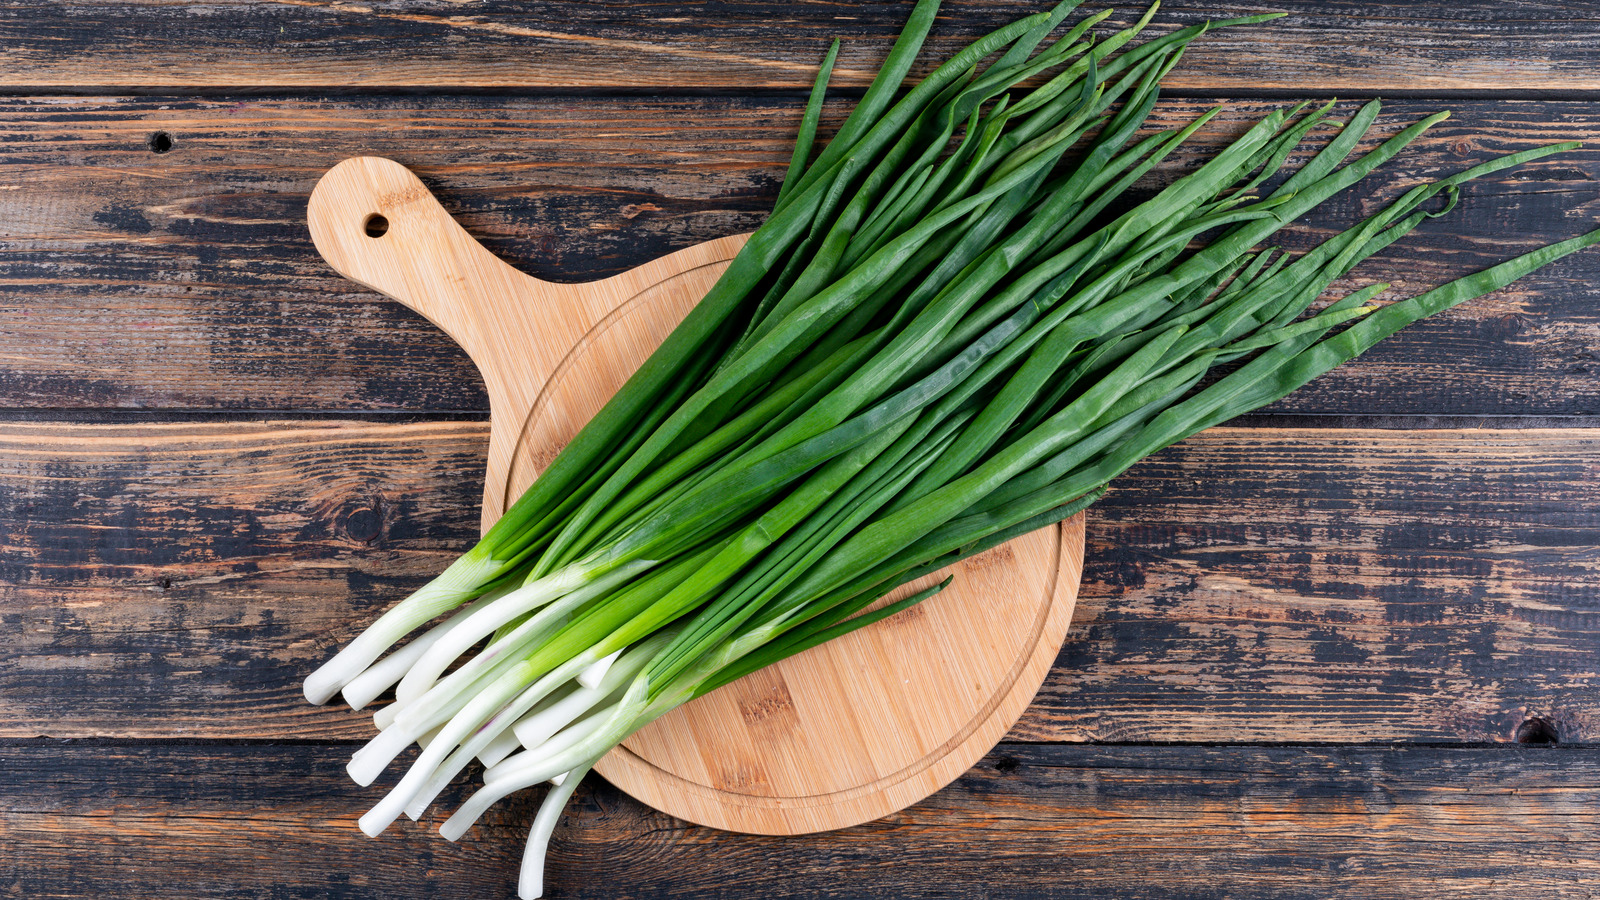 https://www.thedailymeal.com/img/gallery/add-curled-green-onions-to-your-salad-for-a-deliciously-decorative-look/l-intro-1685553630.jpg